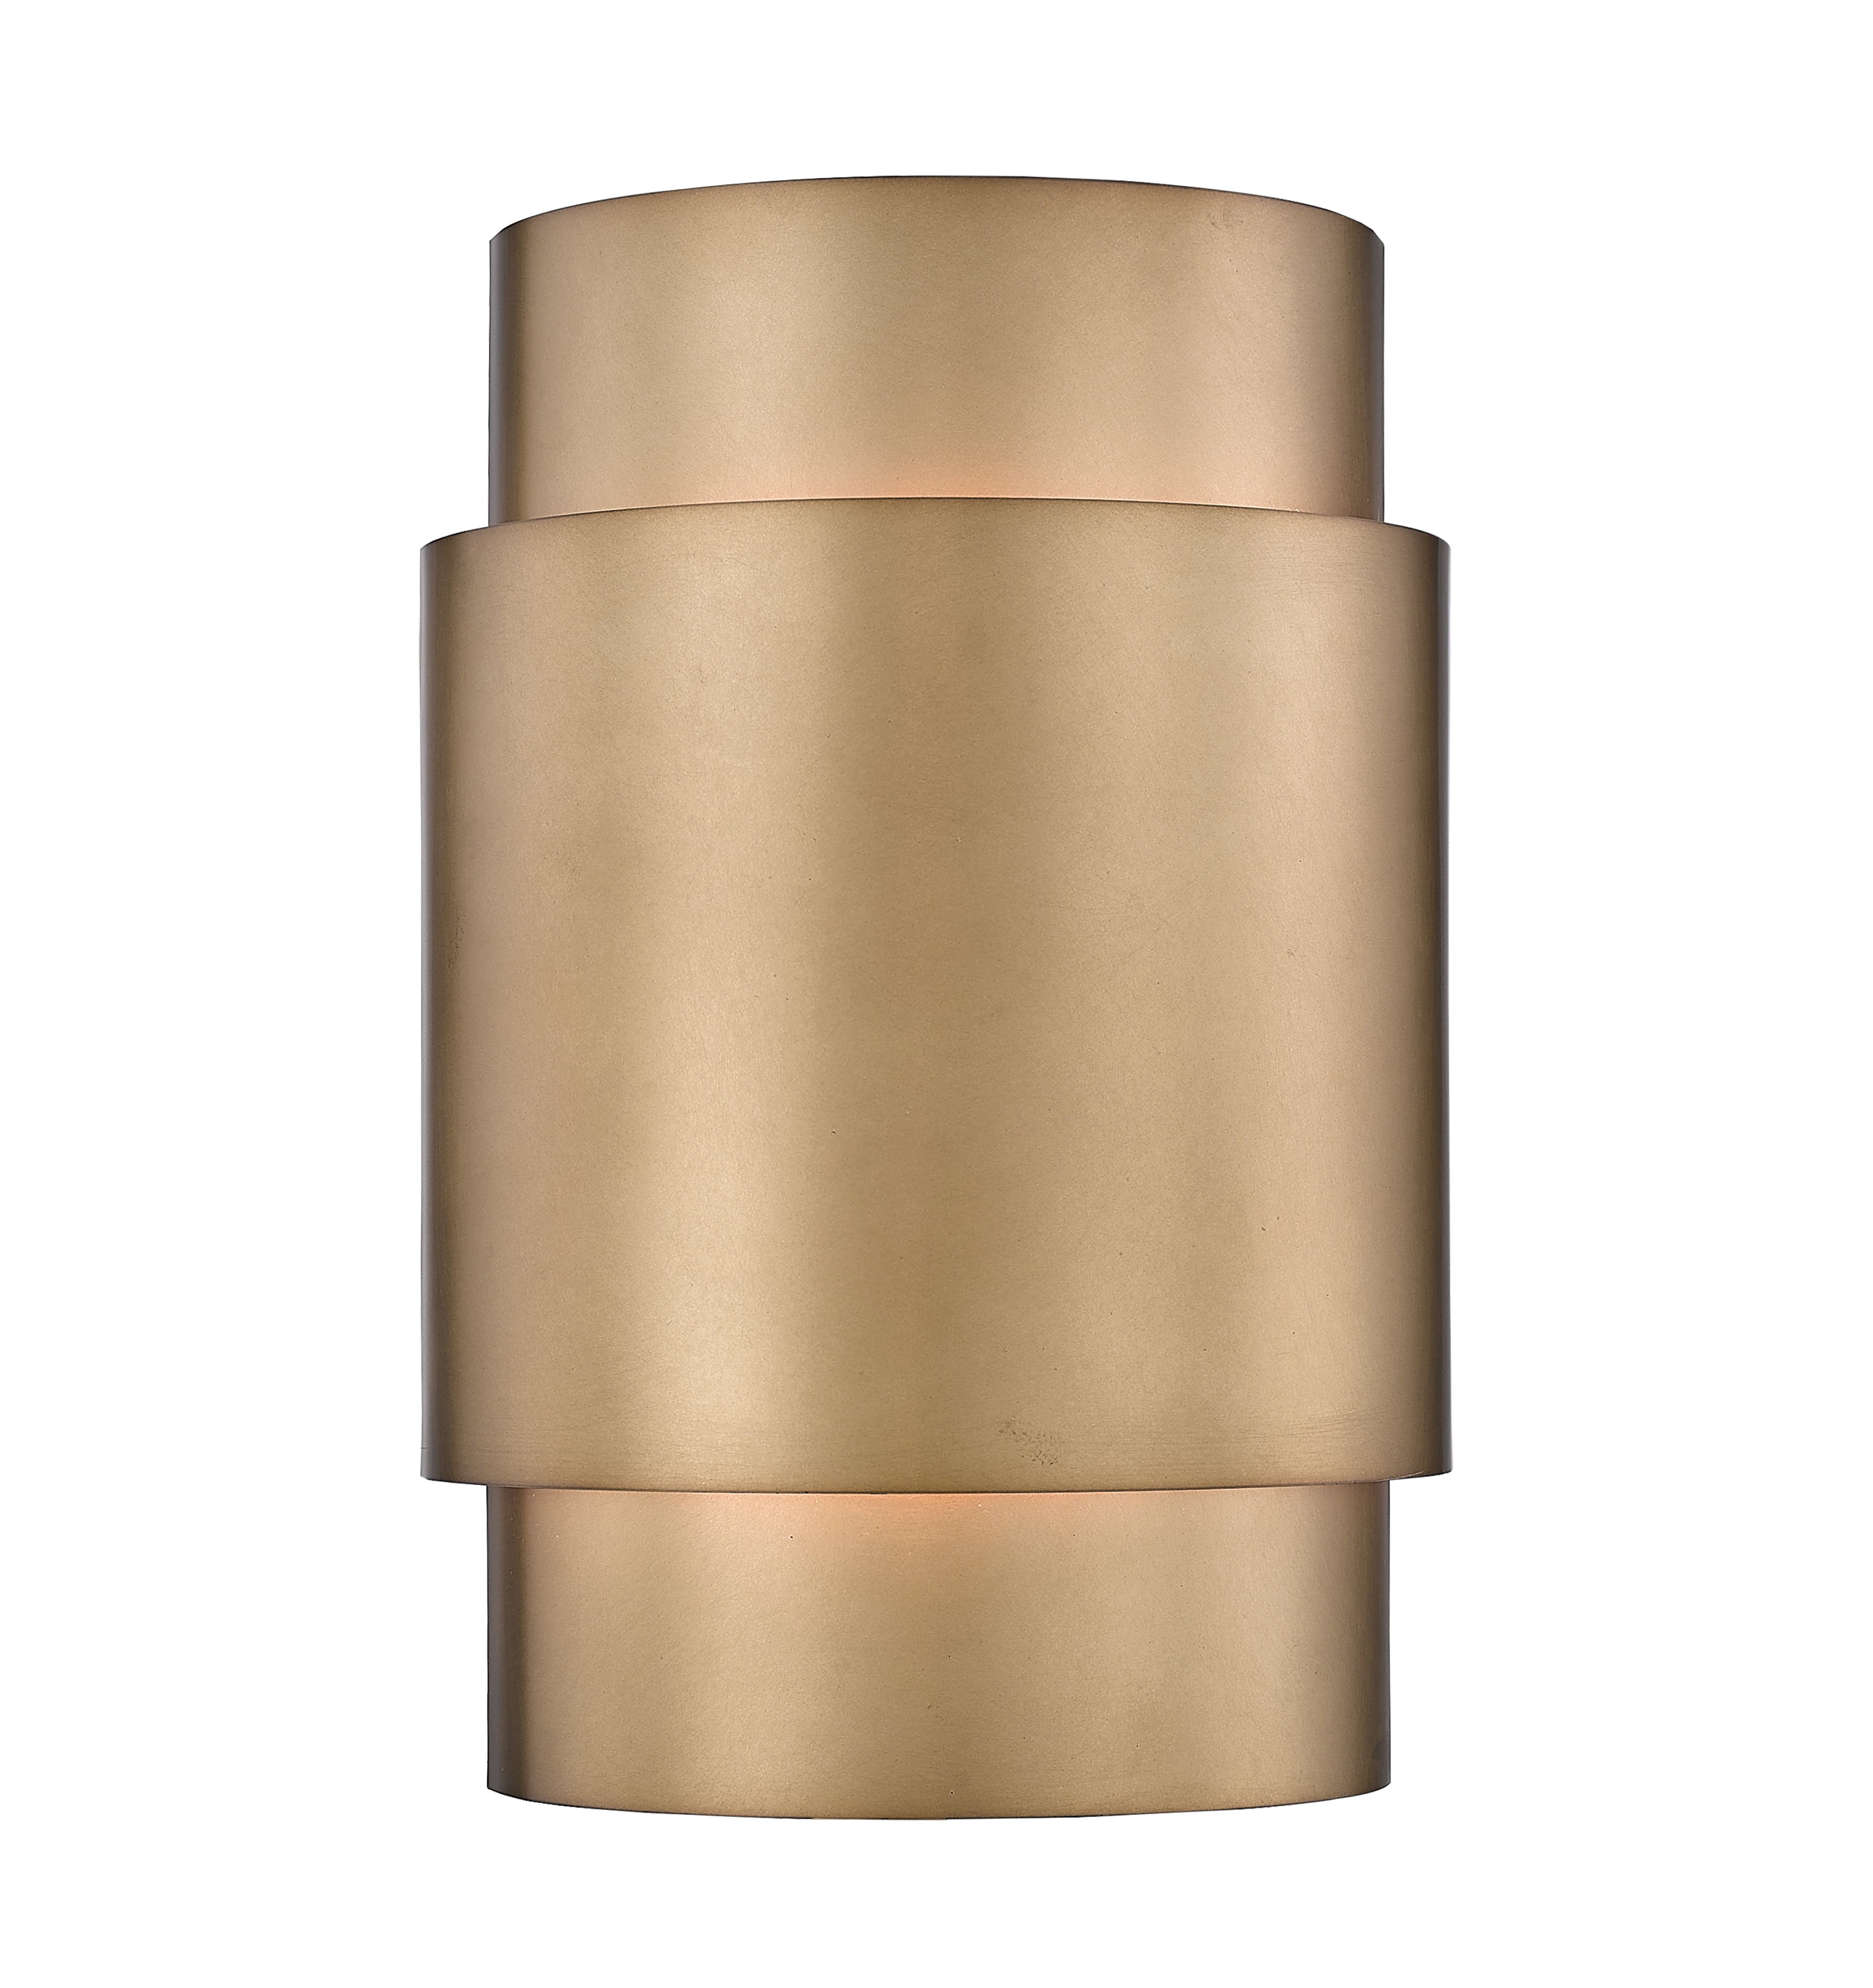 HARLECH Wall sconce Gold - 739S-RB | Z-LITE